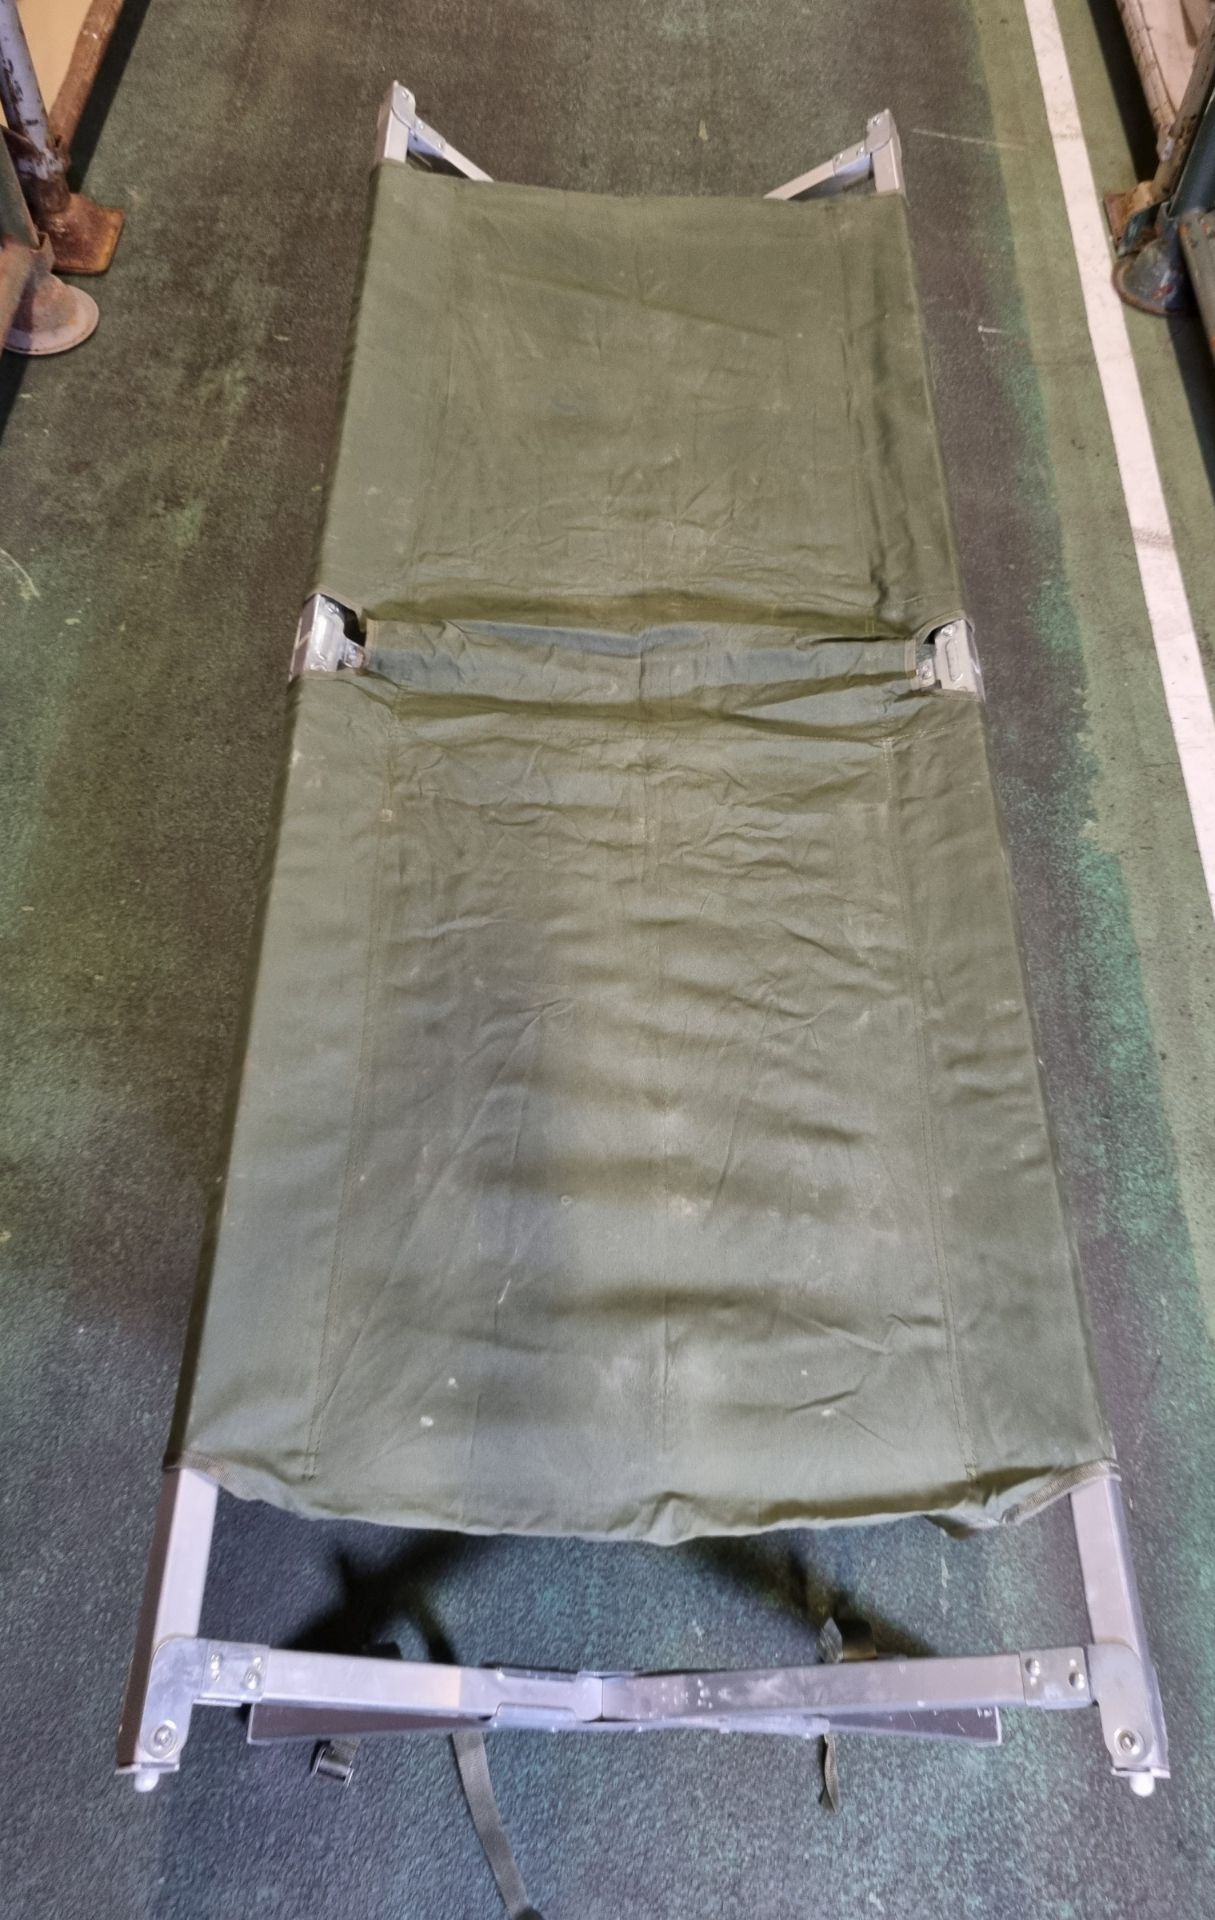 14x Fold out medical beds - metal frame & canvas - L 1950 x W 700 x H 500mm - SPARES OR REPAIRS - Image 3 of 3